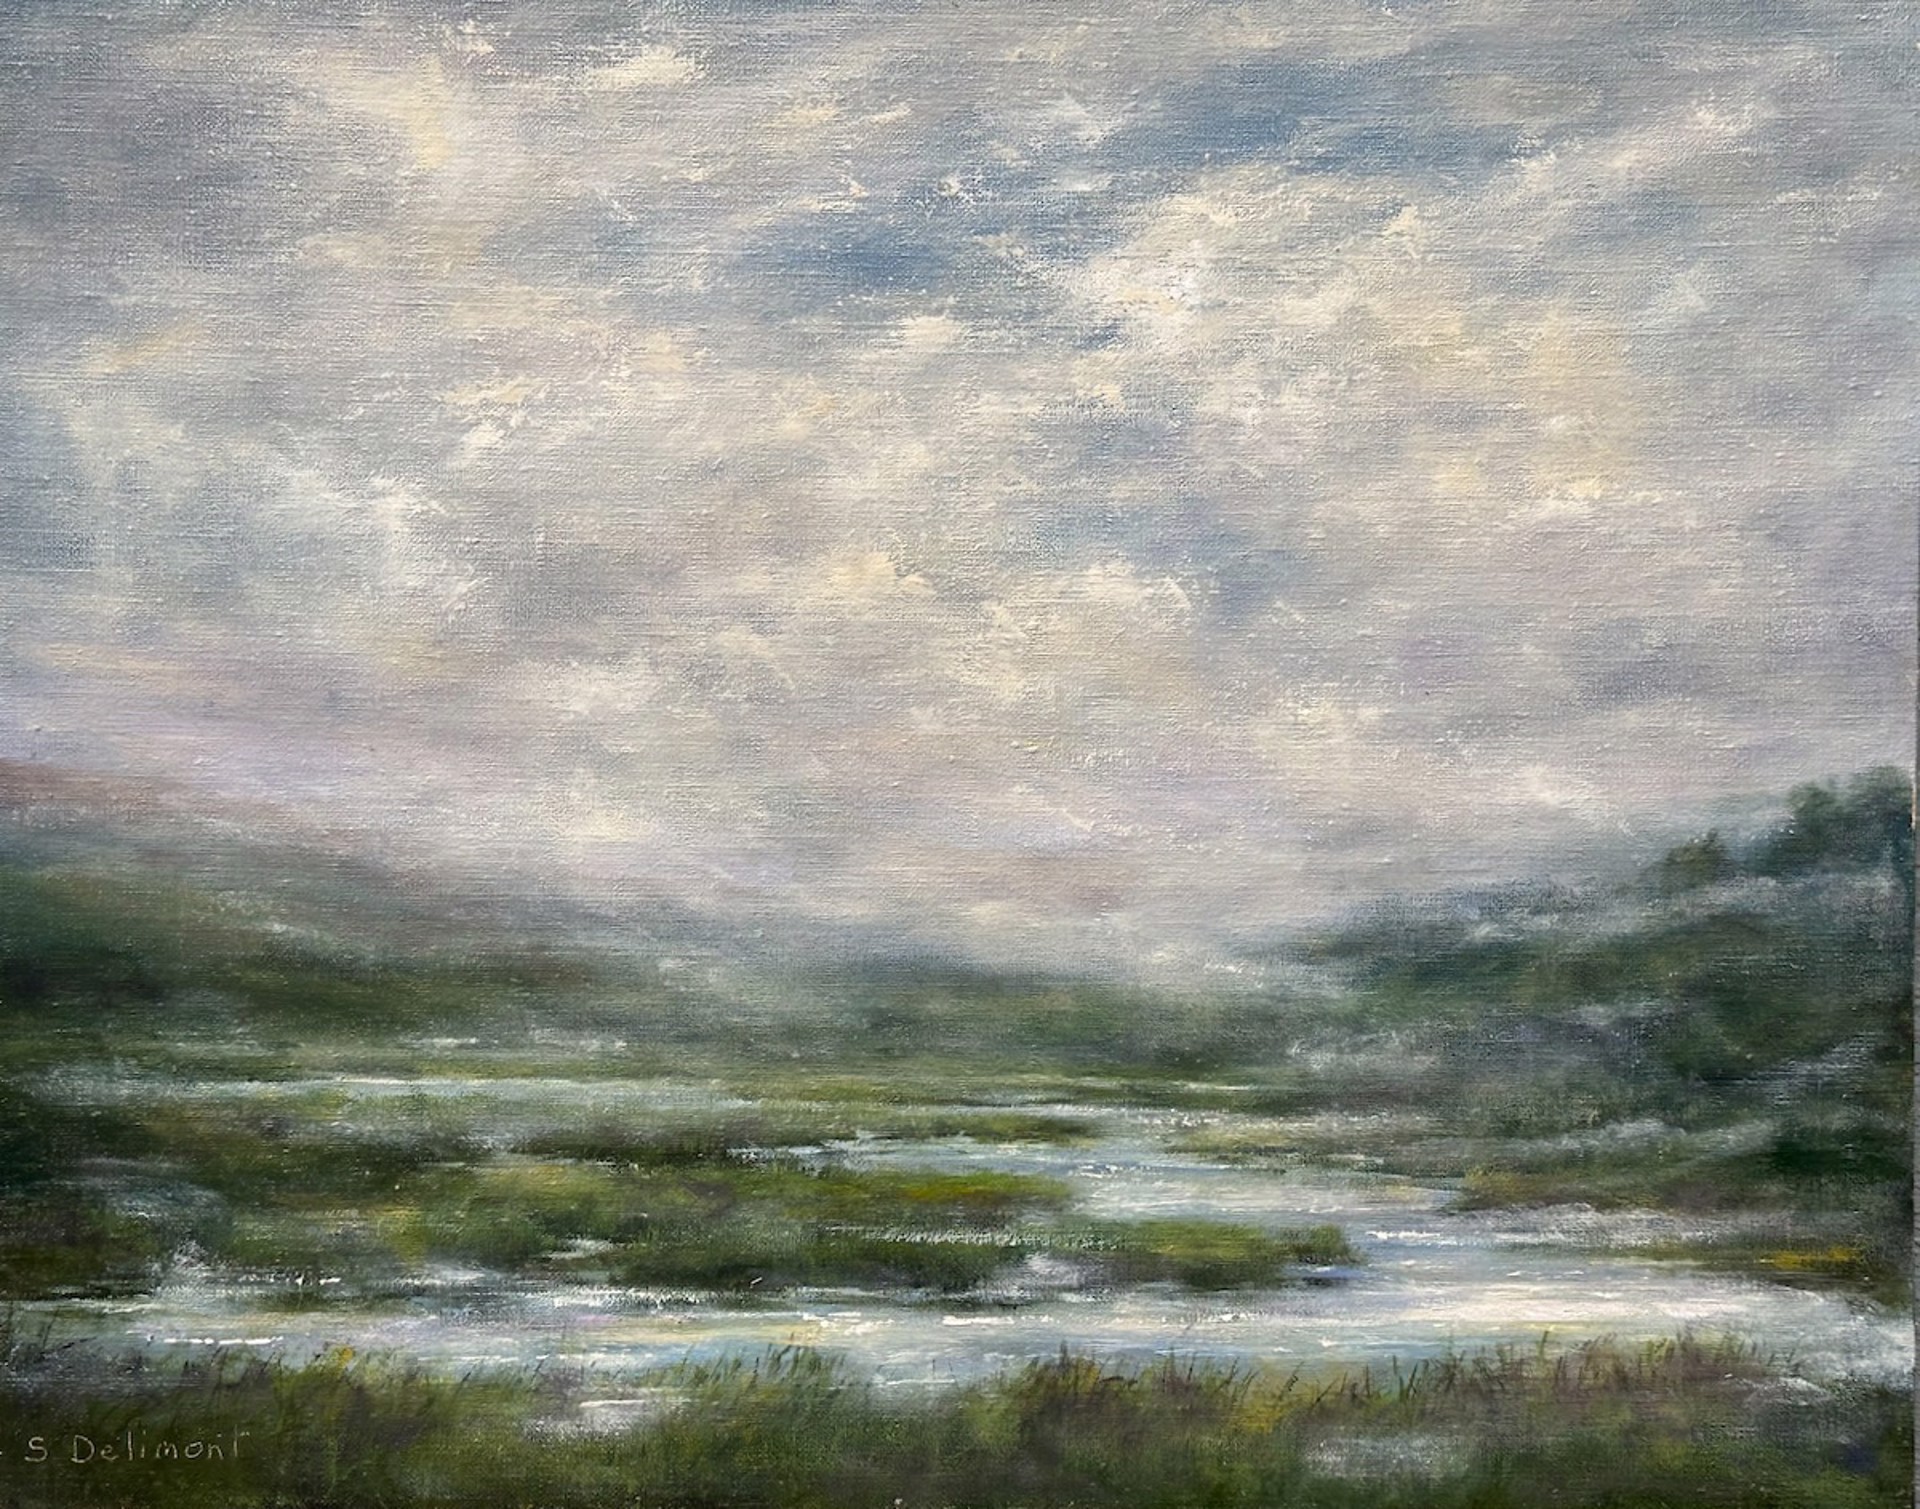 Morning Breaks Over the Marsh by Sheila Delimont